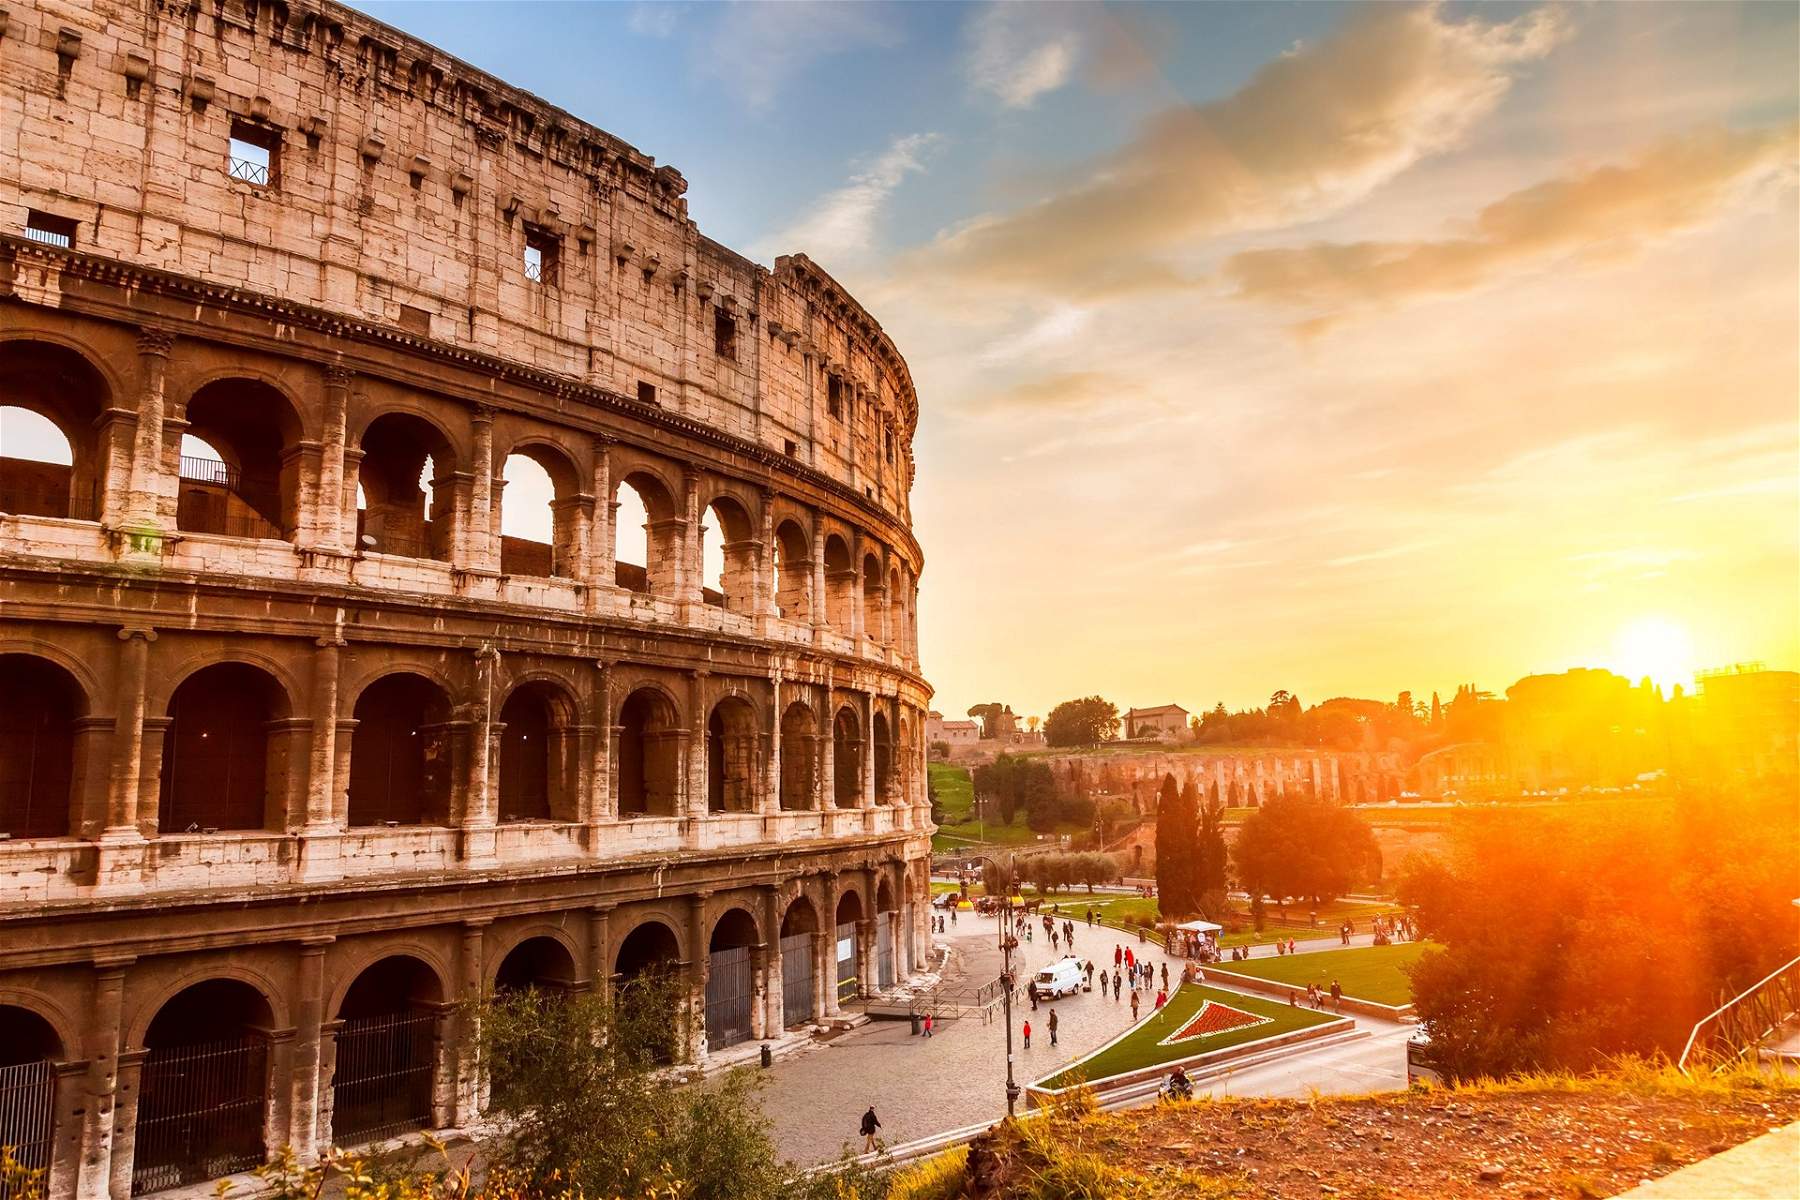 Colosseum, renewed ticketing service soon. MiC and Anac protocol signed 